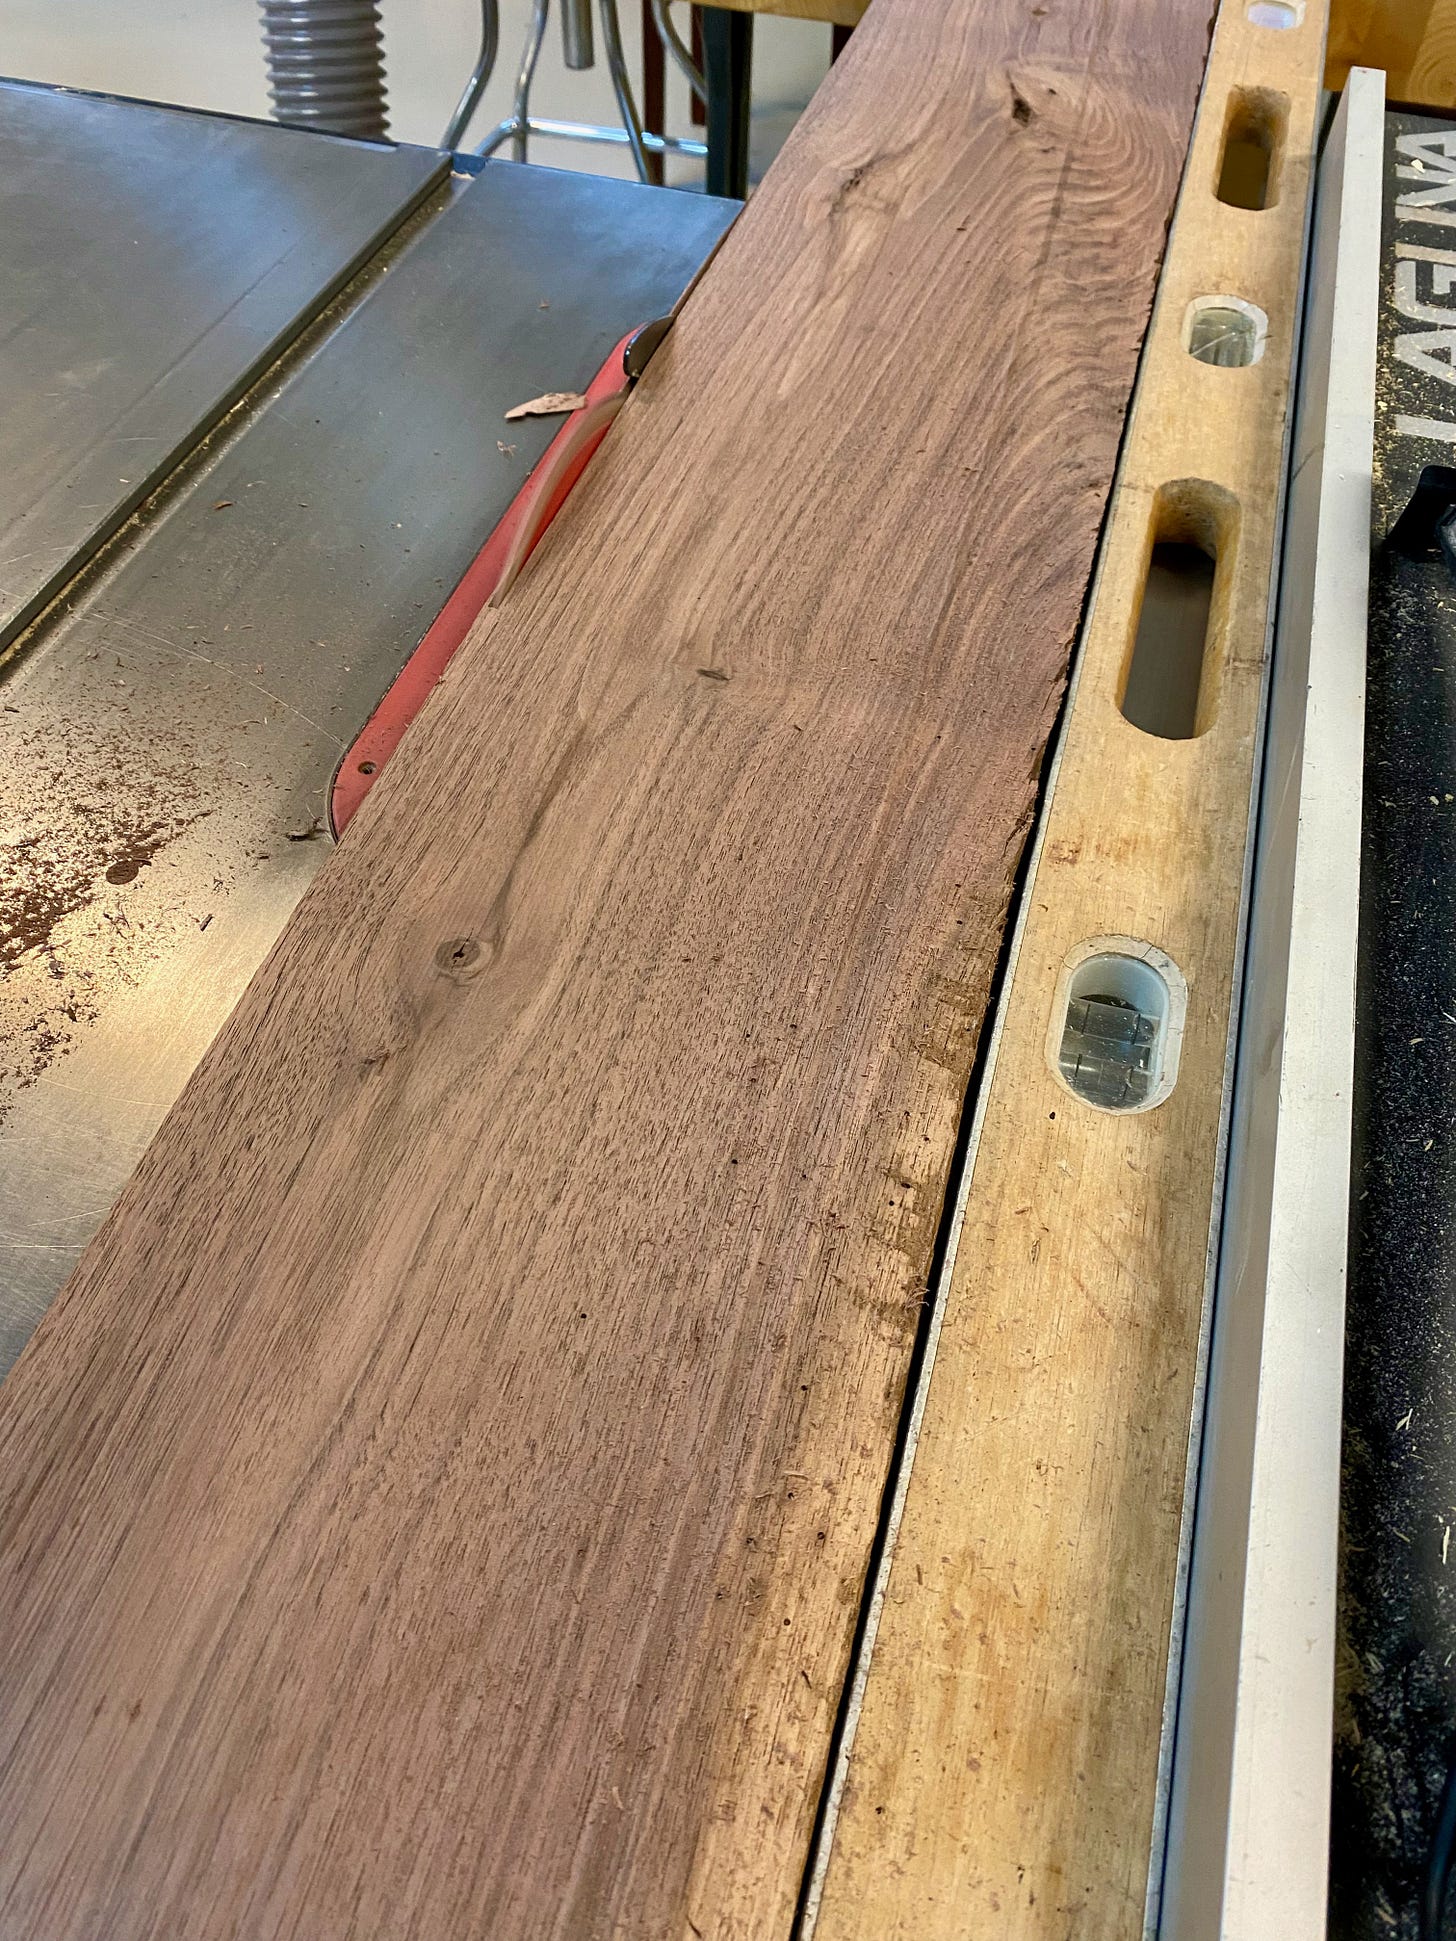 Jointing on the table saw